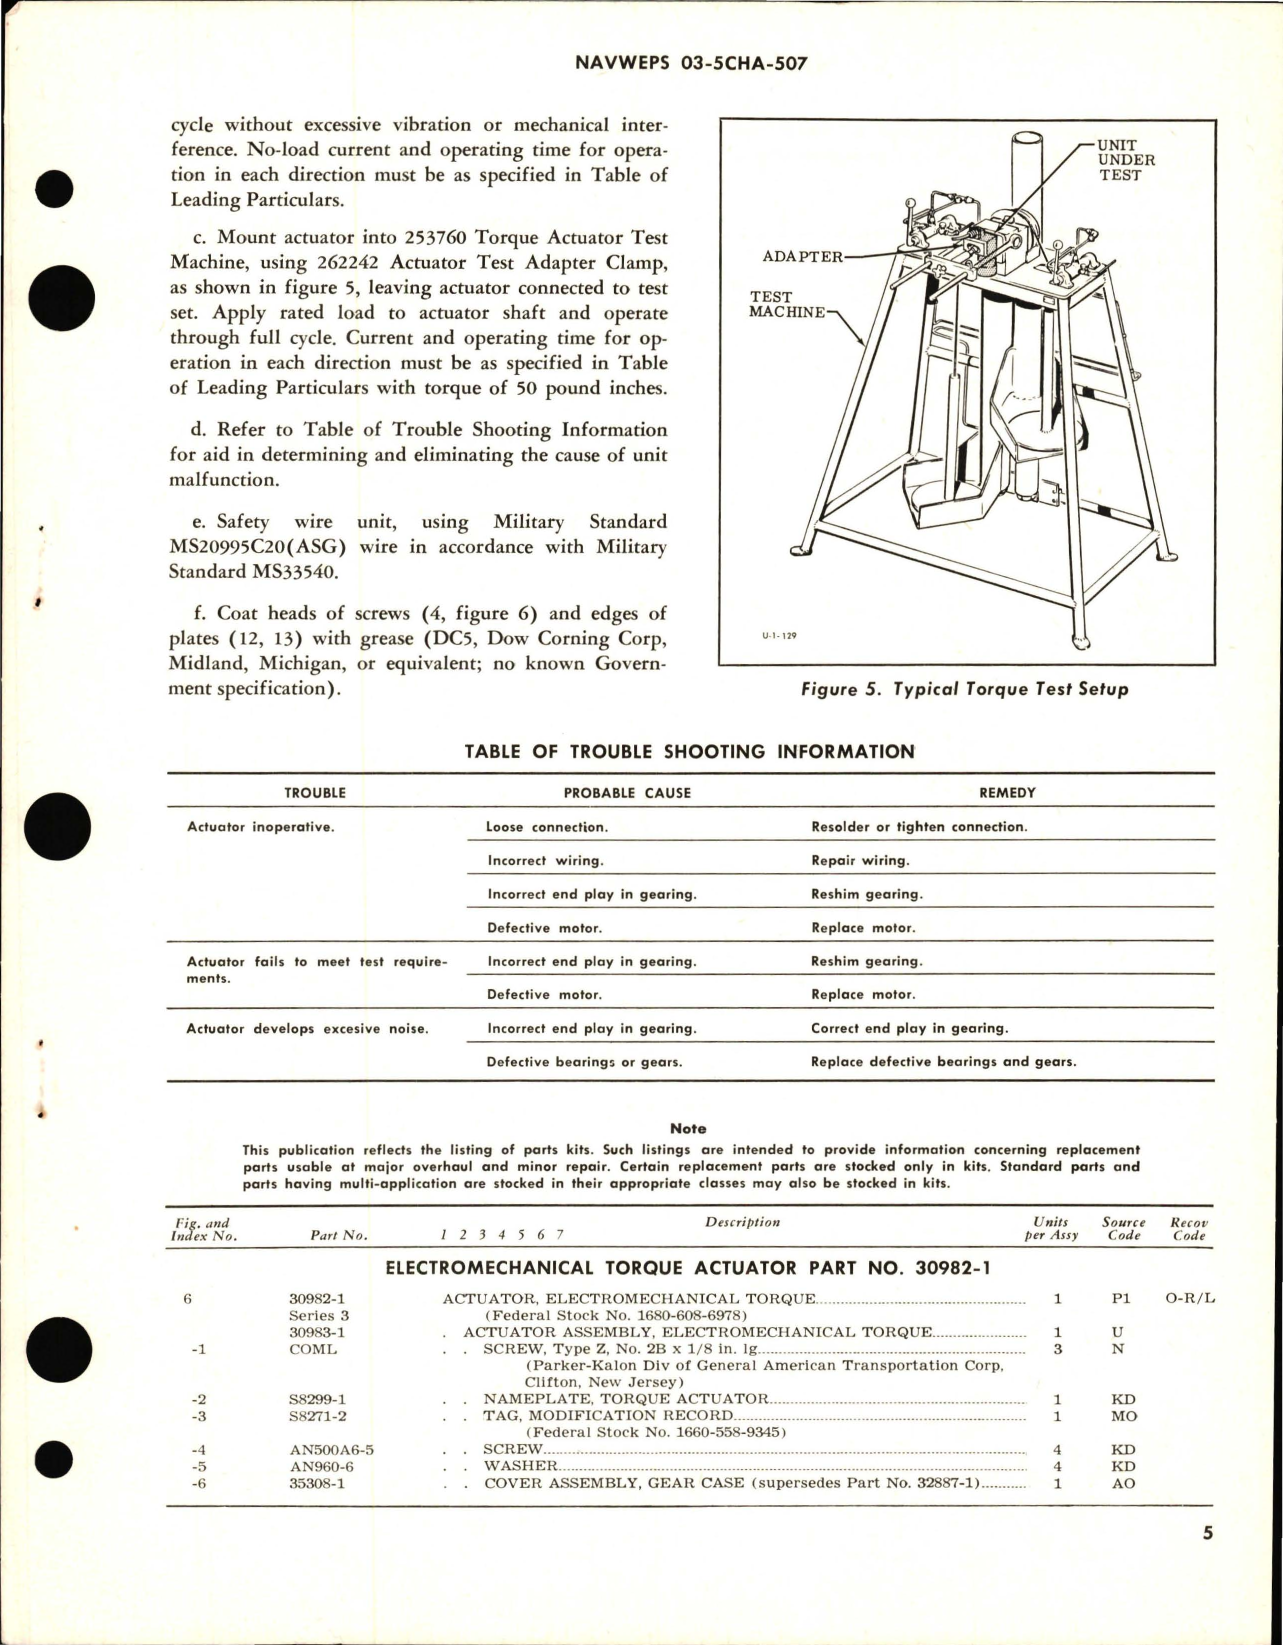 Sample page 5 from AirCorps Library document: Overhaul Instructions with Parts Breakdown for Electromechanical Torque Actuator - Part 30982-1